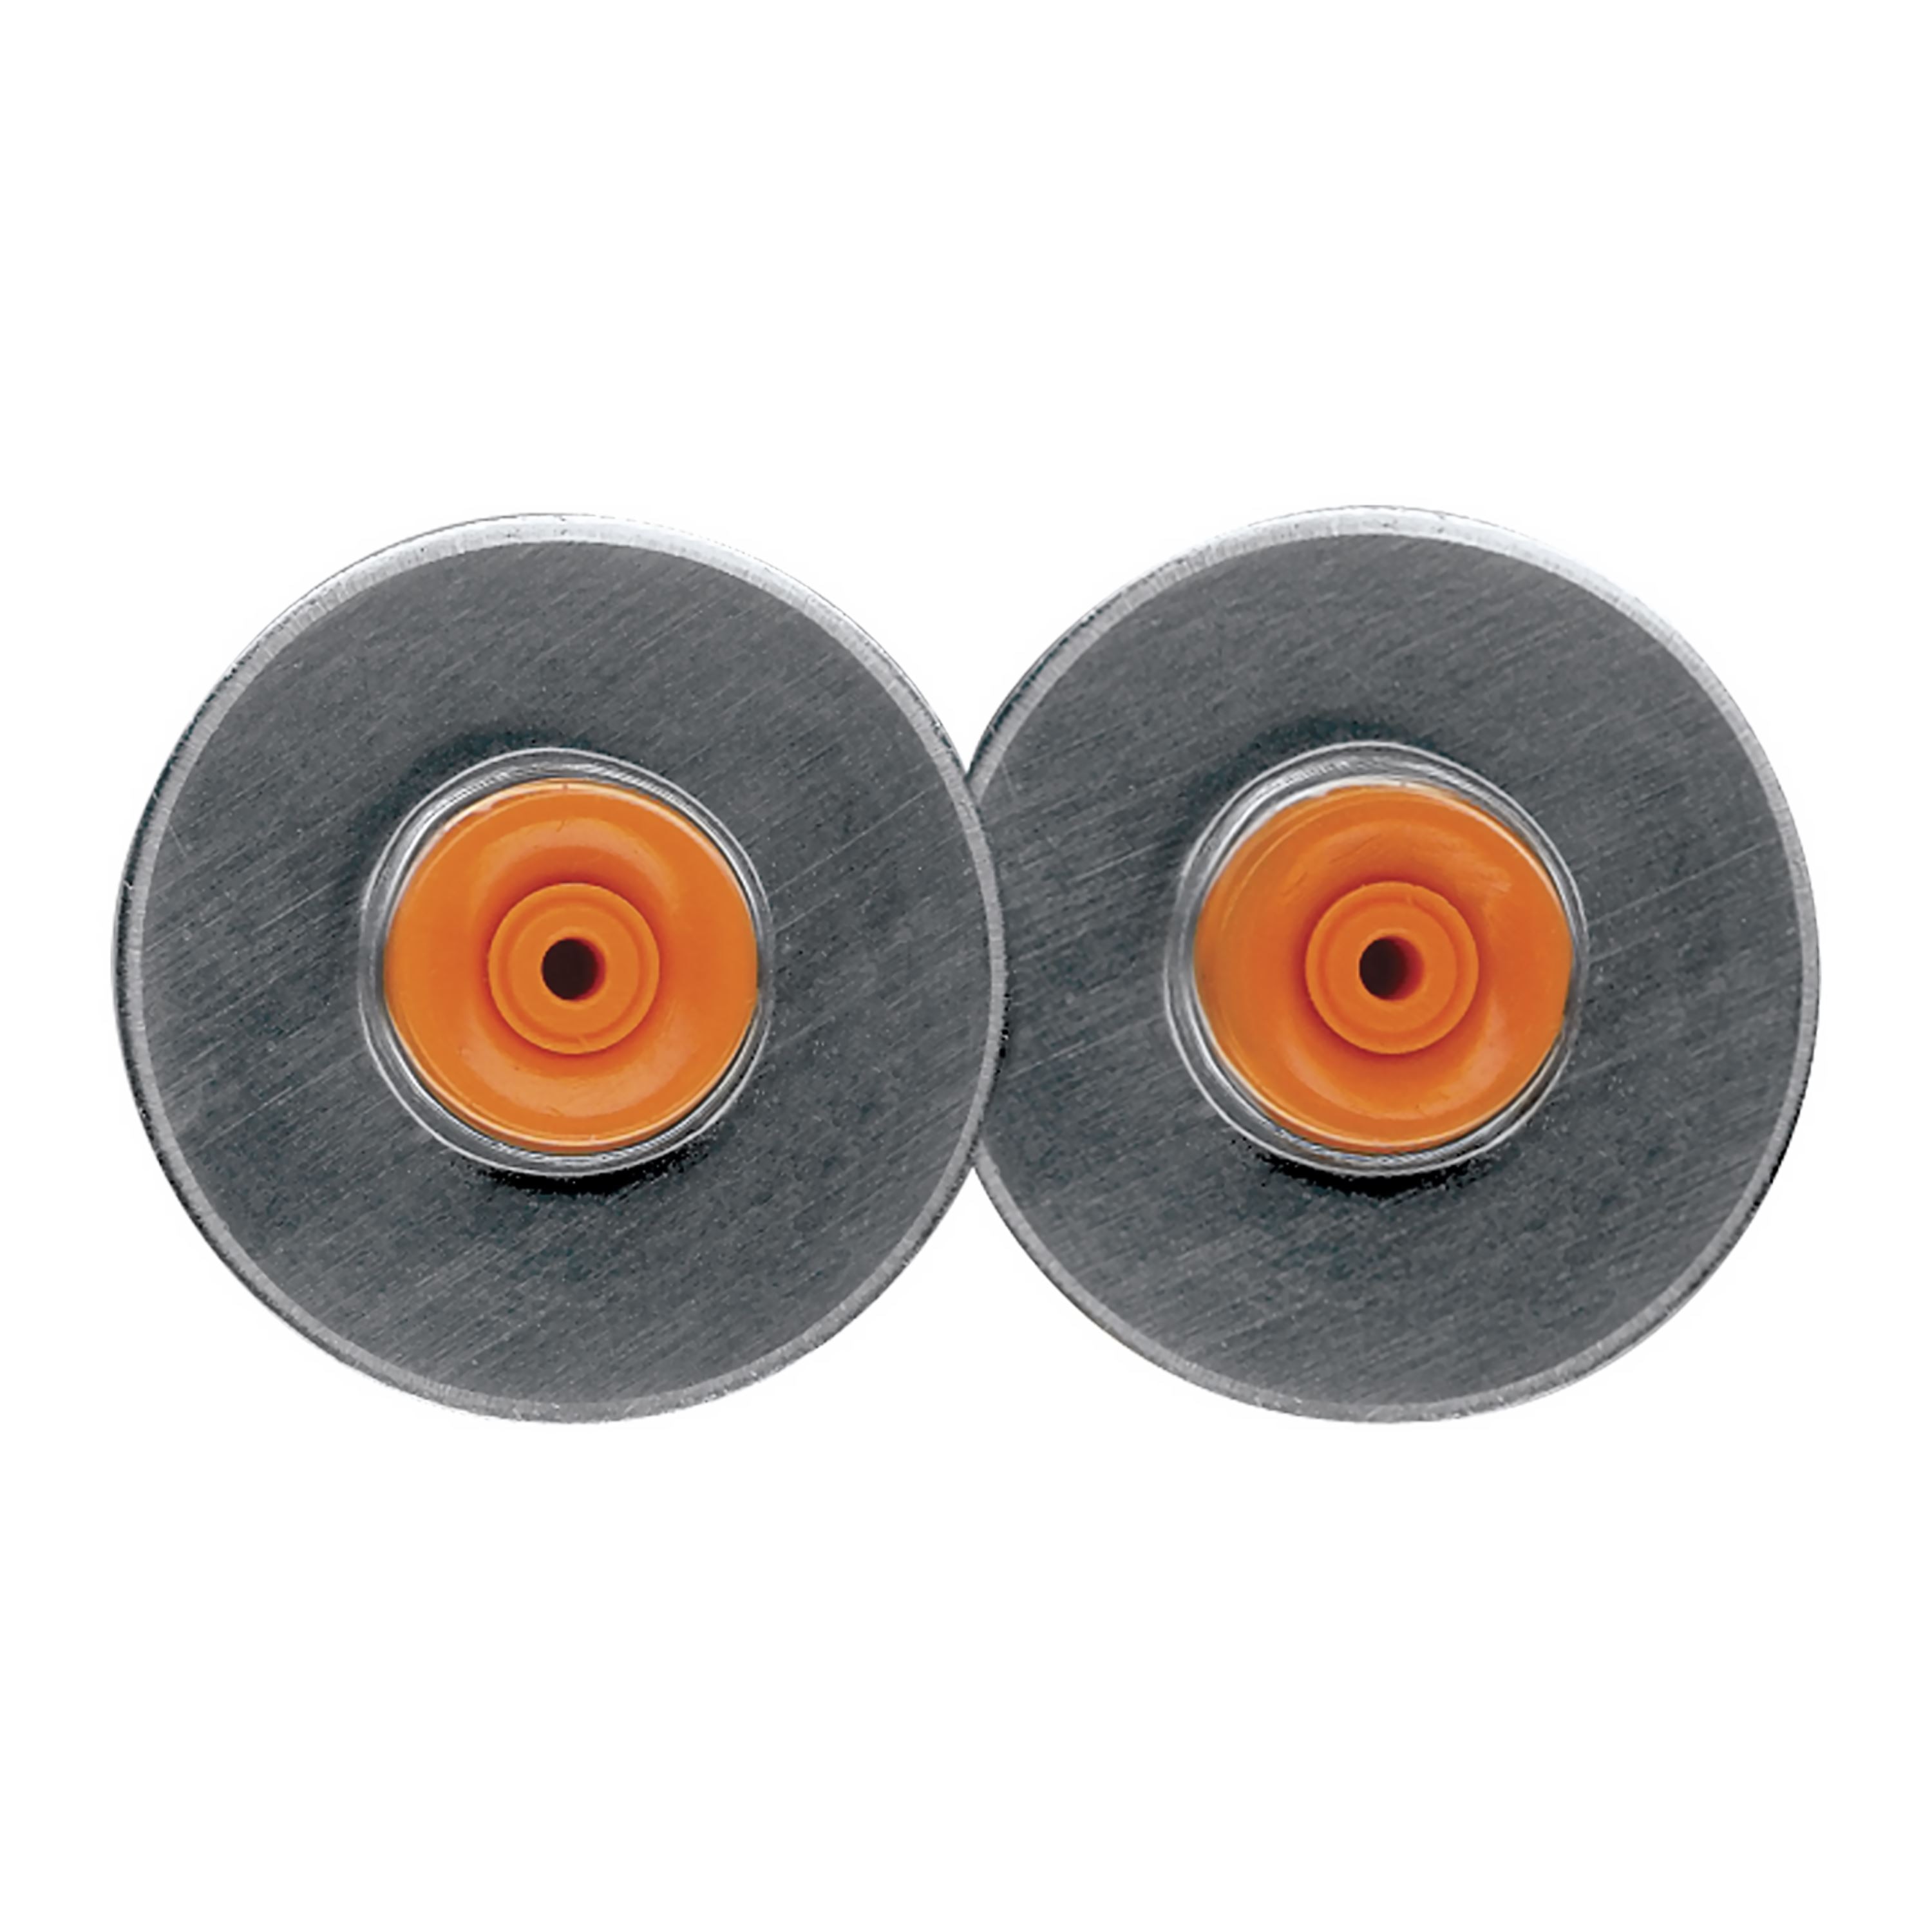 Wolff FasTrimmer/Pro Circle Cutter Spare Blades (10 Pack)